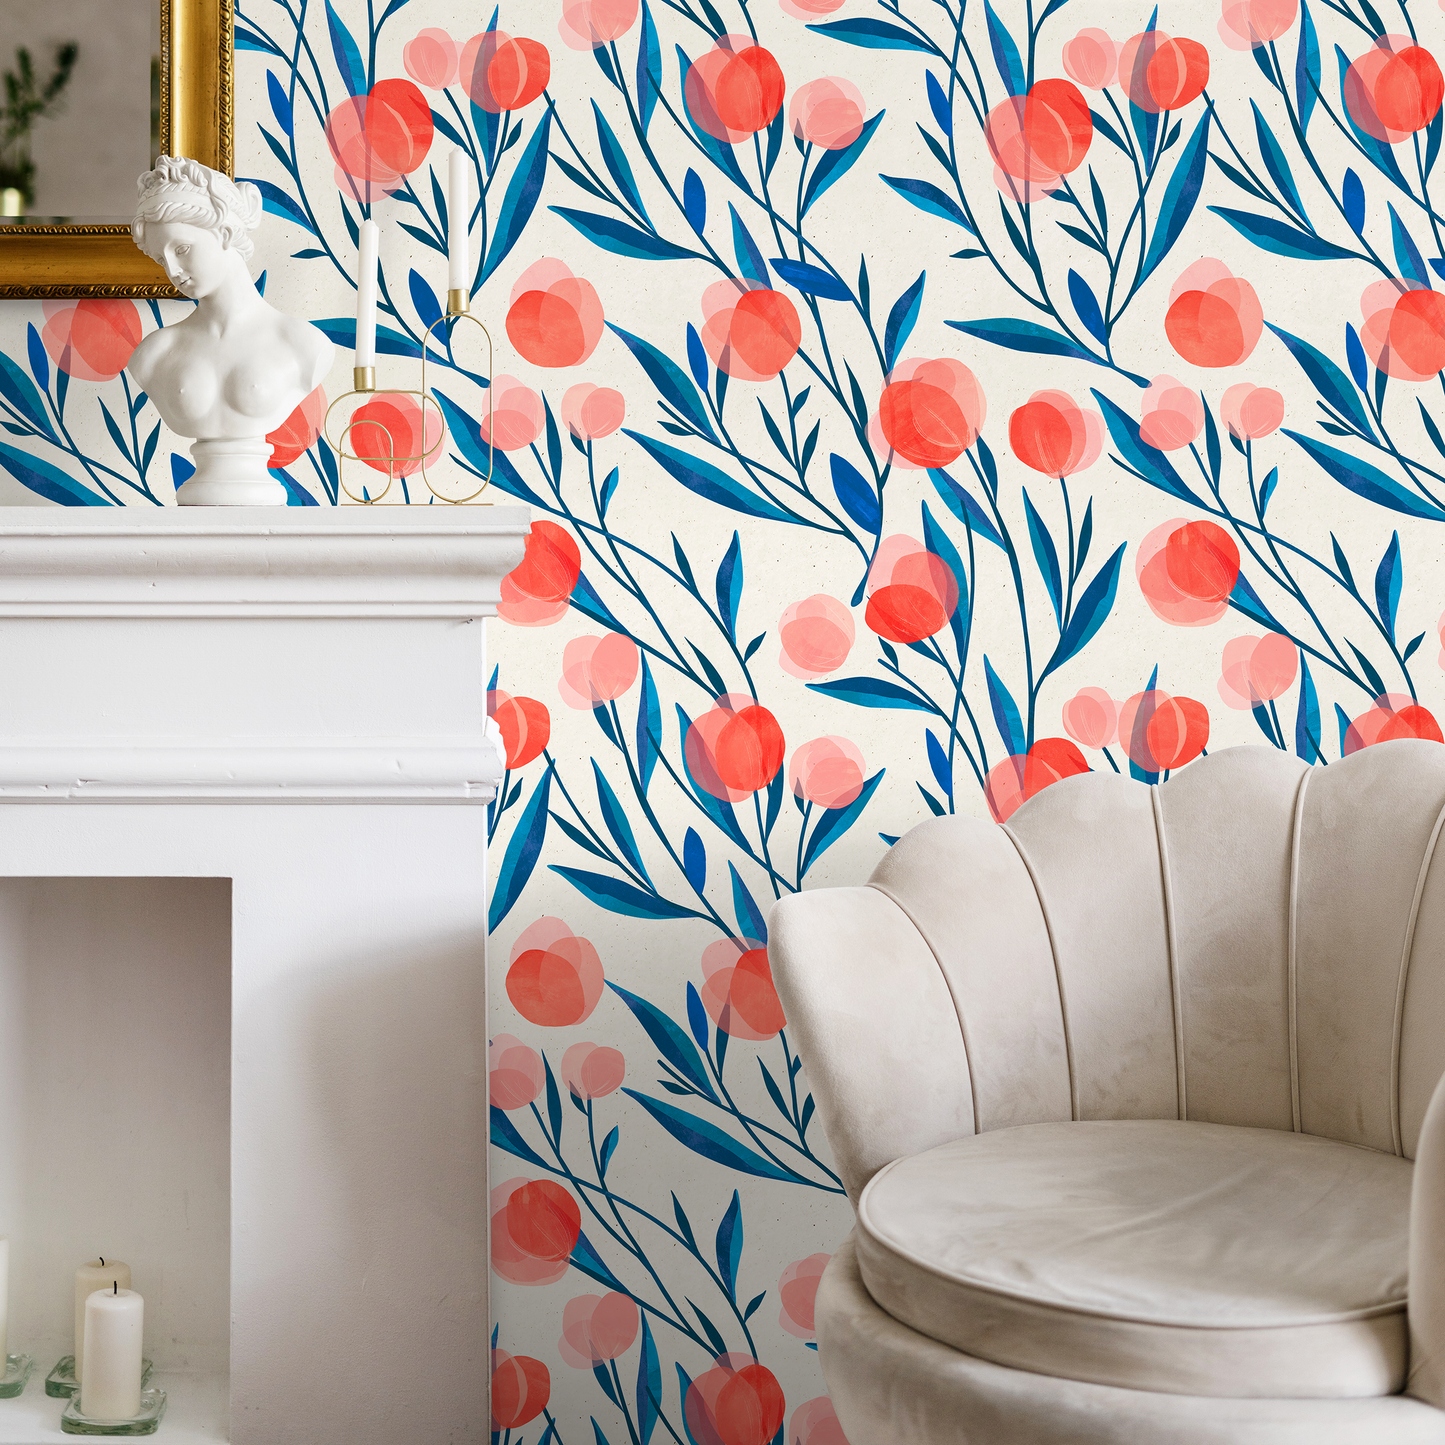 Floral Garden Wallpaper Peel and Stick and Traditional Wallpaper - A323